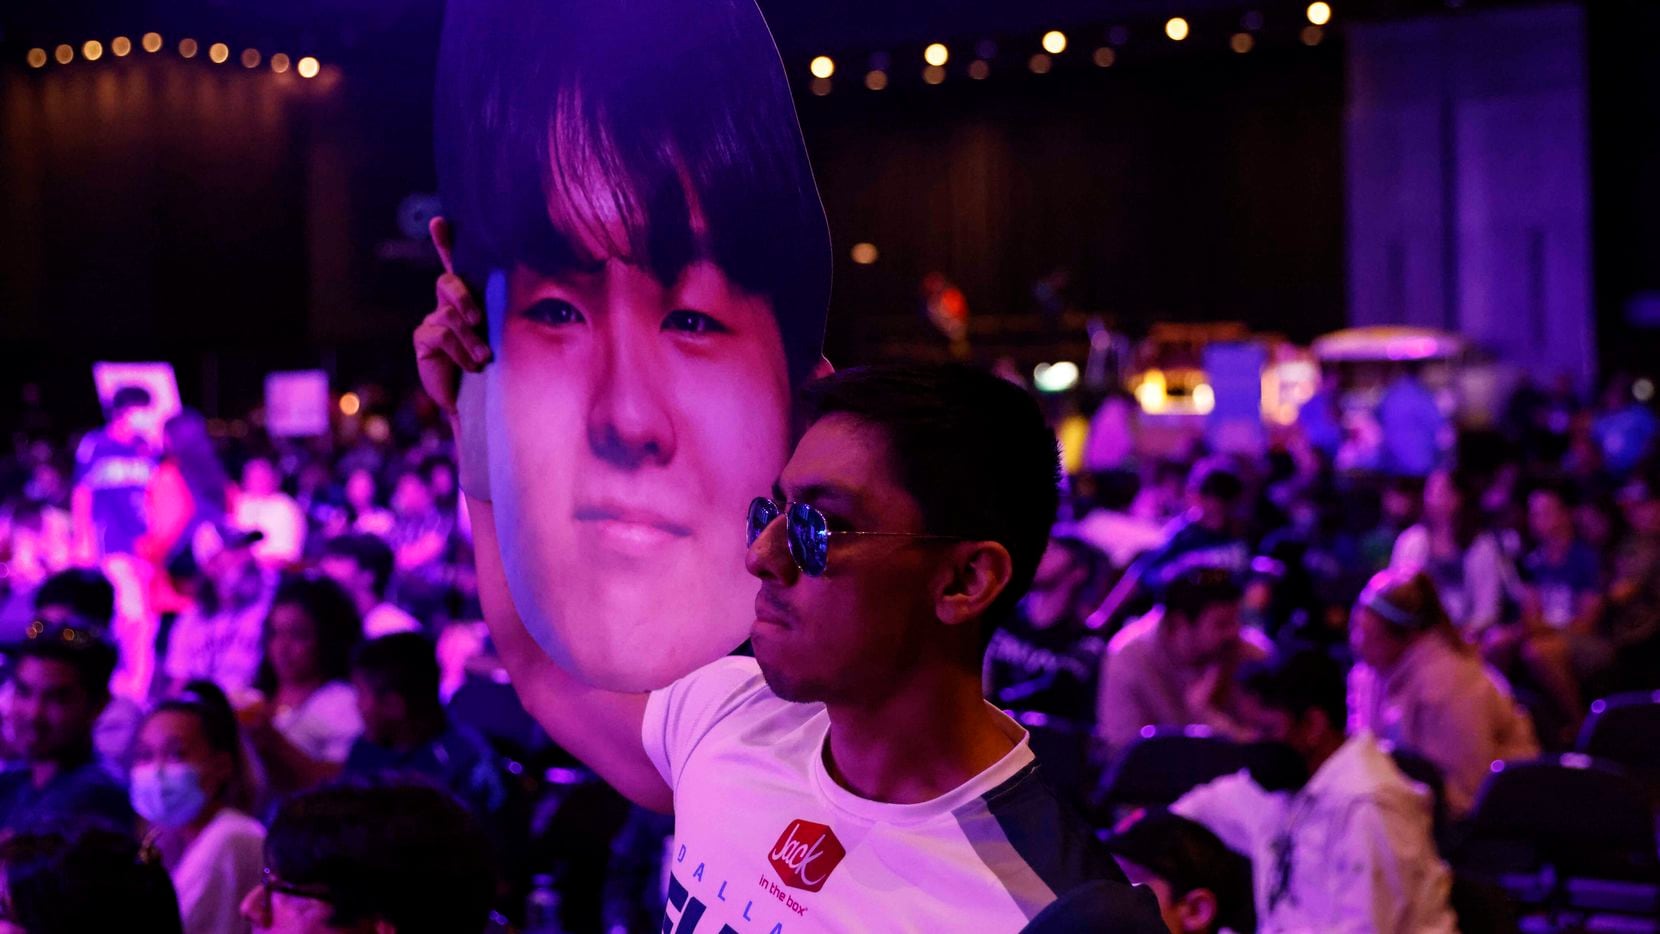 Andrew Diaz shows his support as Dallas Fuel falls against LA Gladiators during Overwatch...